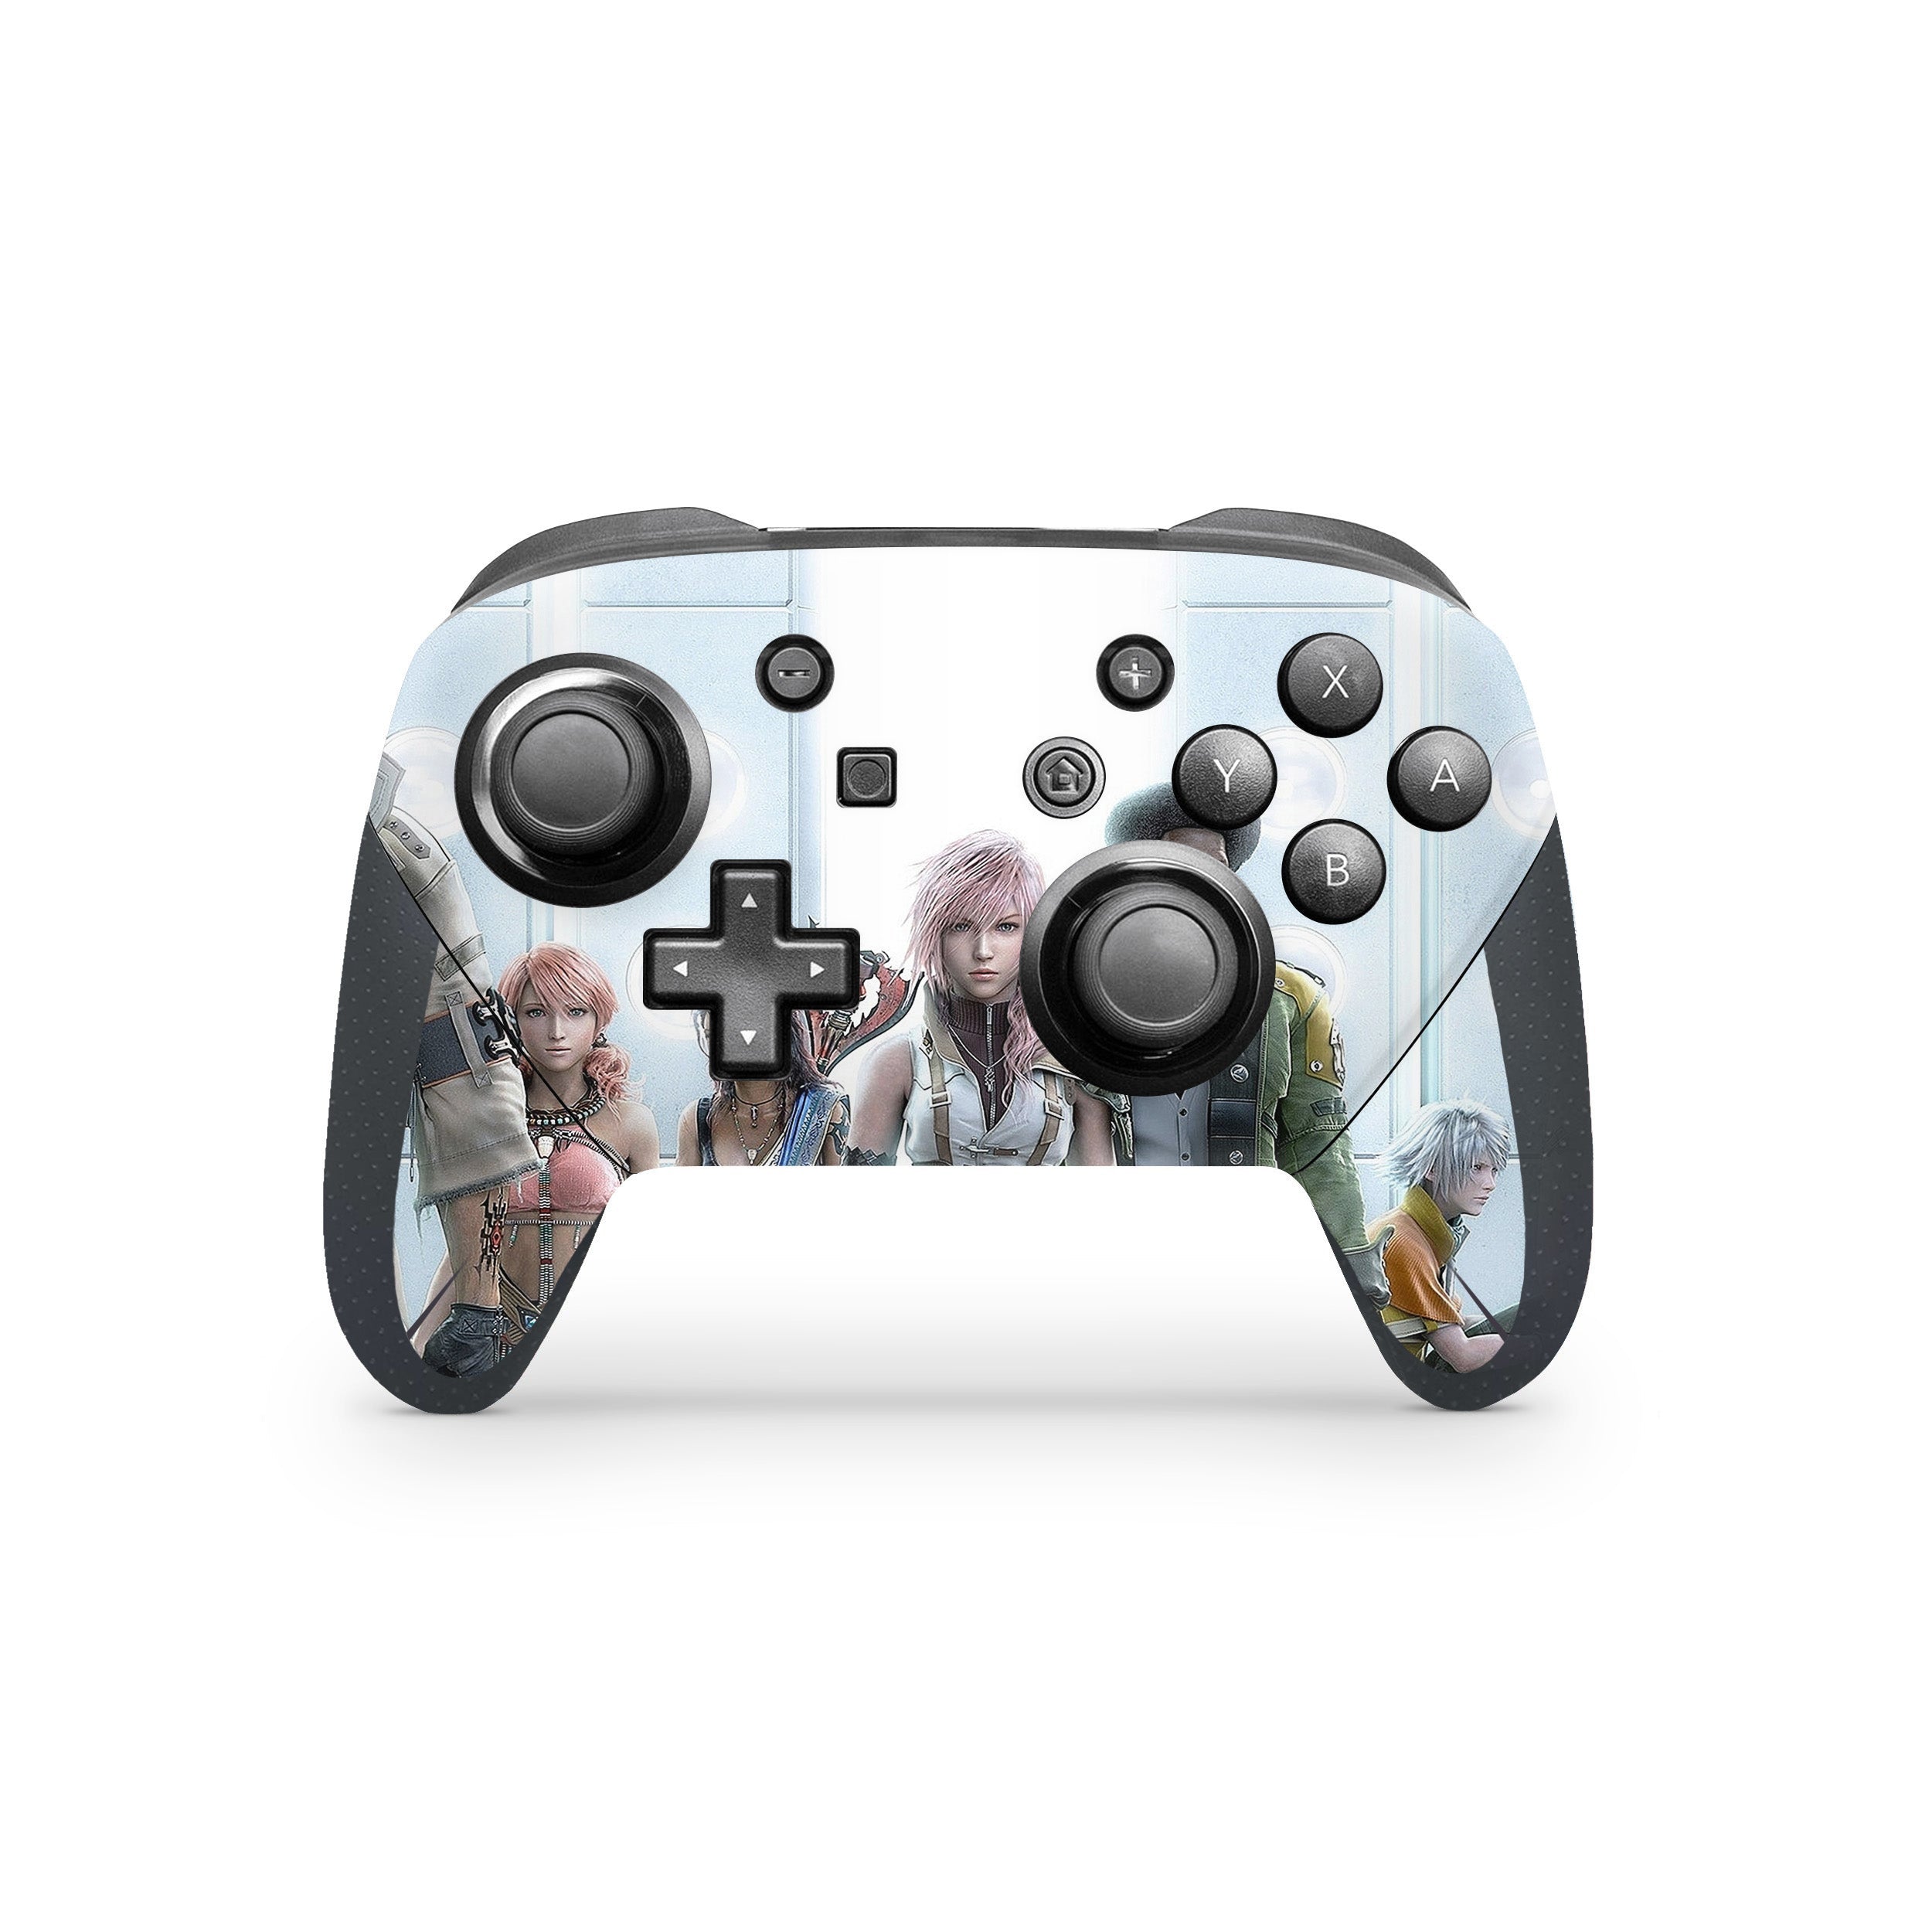 A video game skin featuring a Final Fantasy 13 Squad design for the Switch Pro Controller.